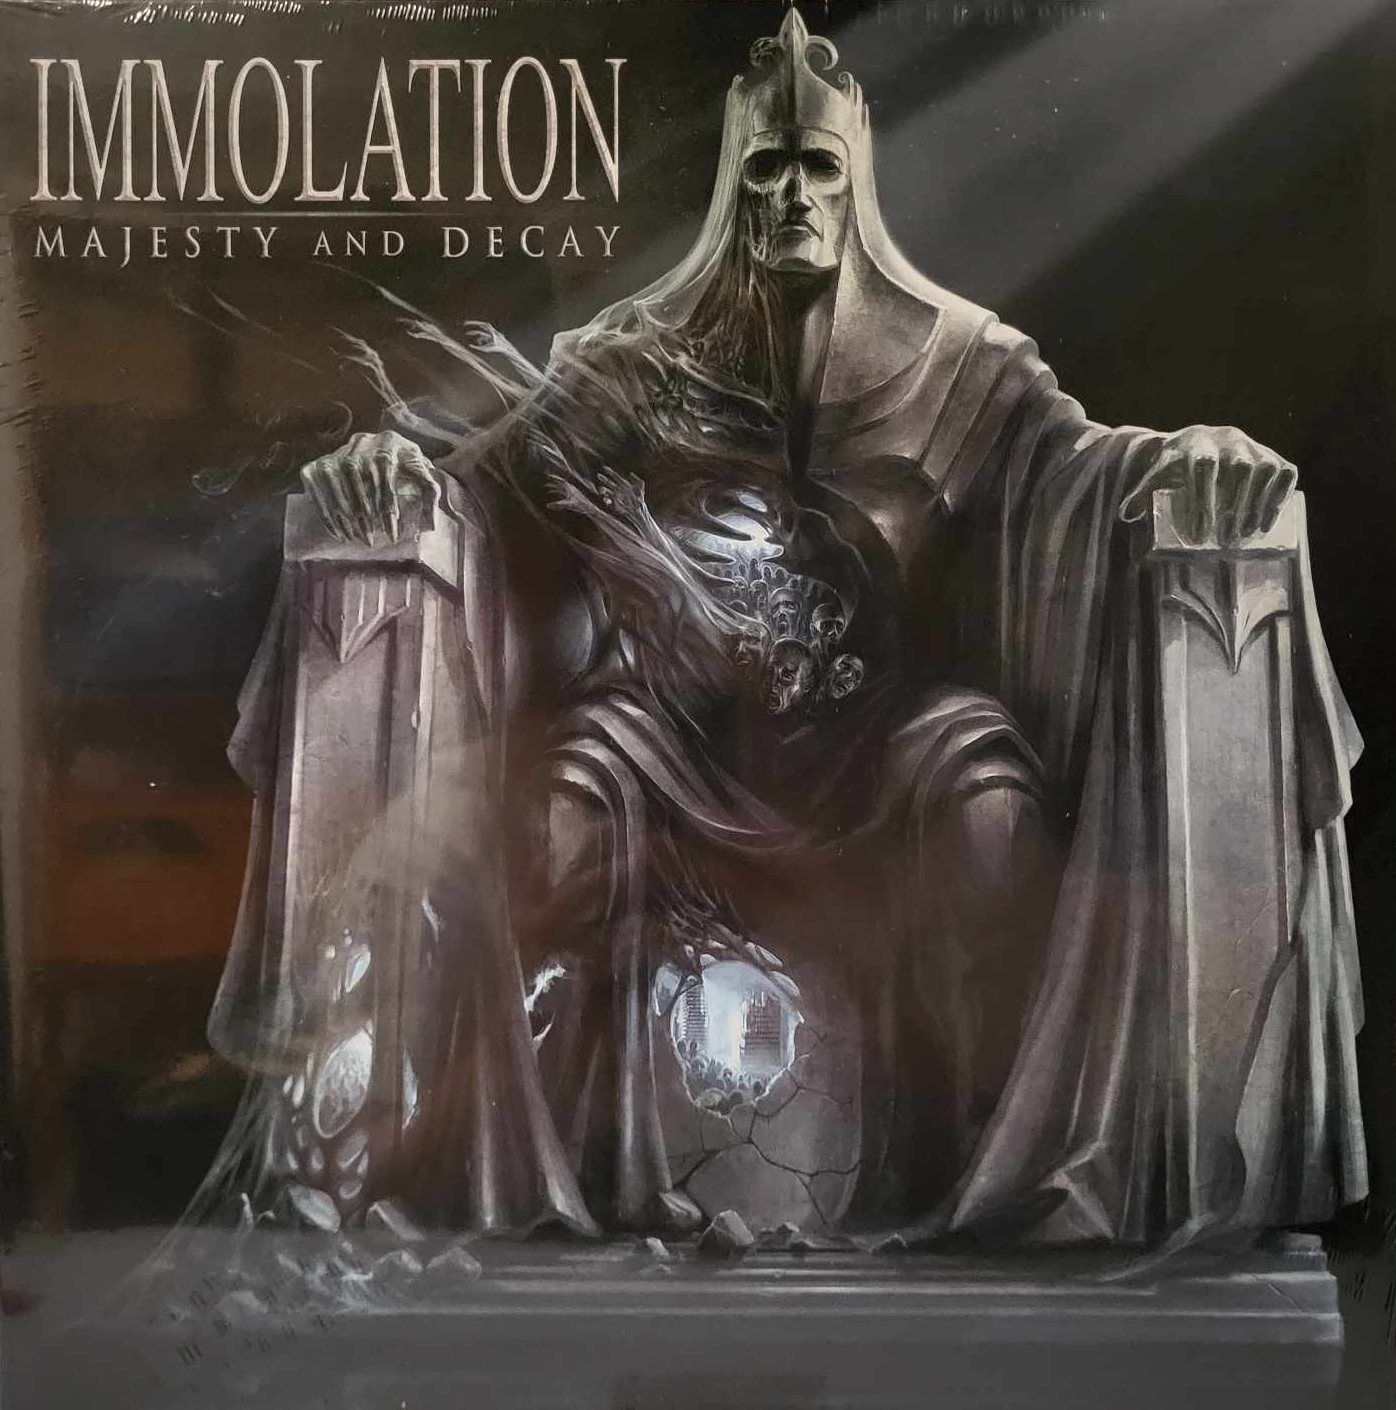 IMMILATION - MAJESTY AND DECAY